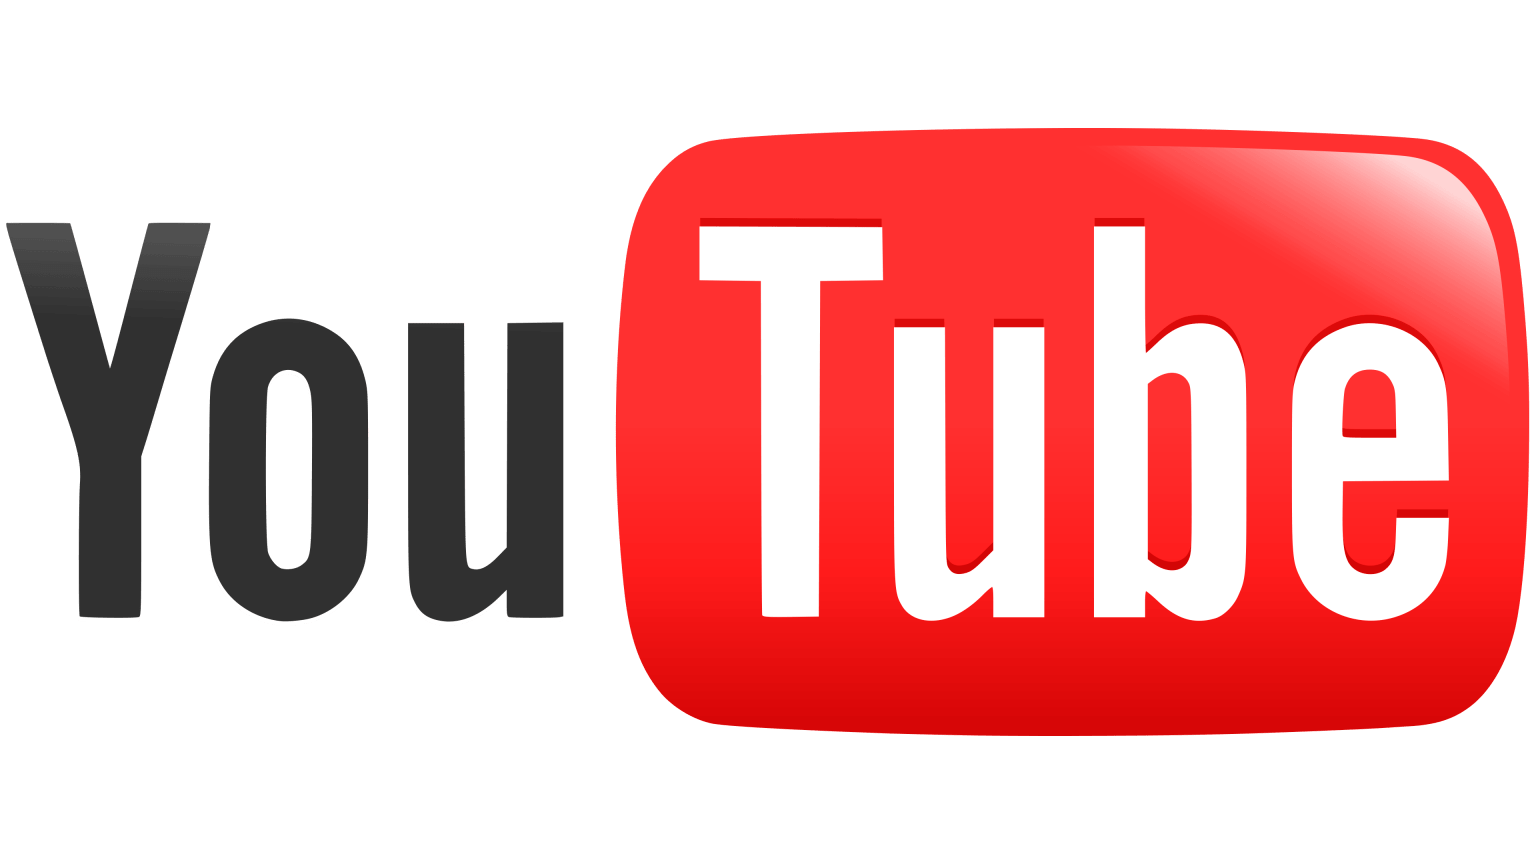 download youtube shorts